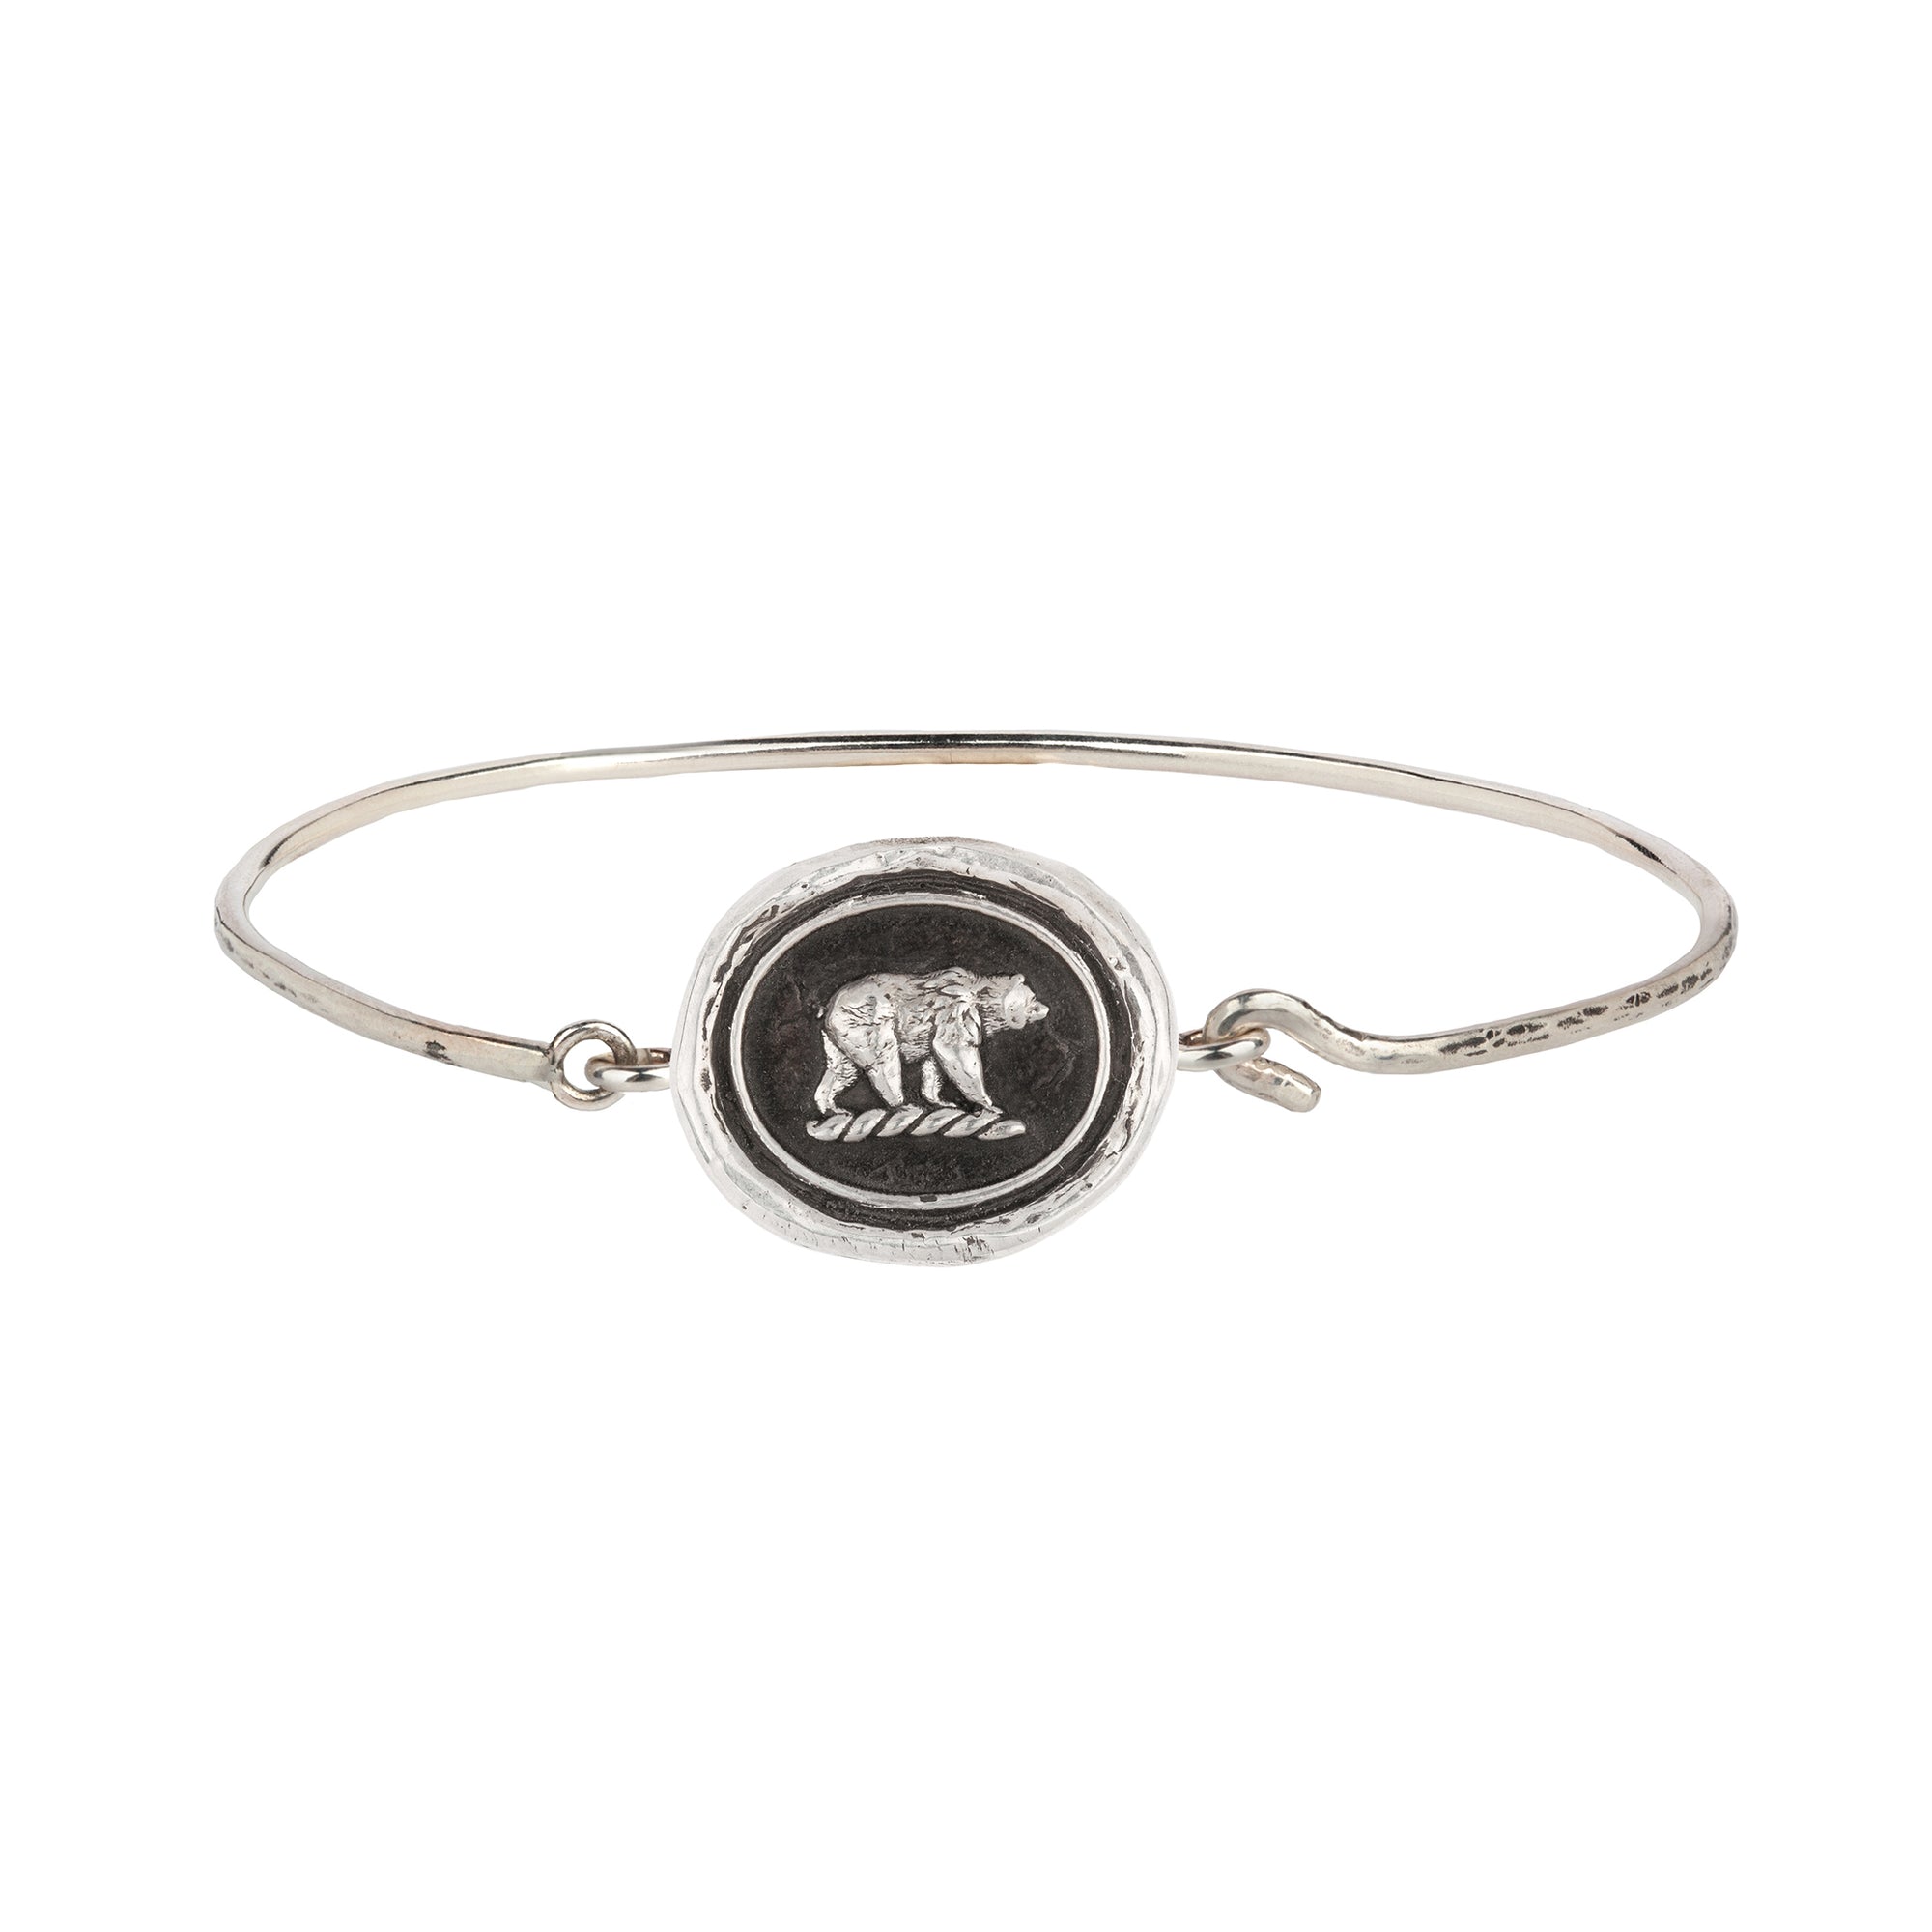 A hard sterling silver band fastened with a hook and eye clasp featuring our Mother Bear talisman.